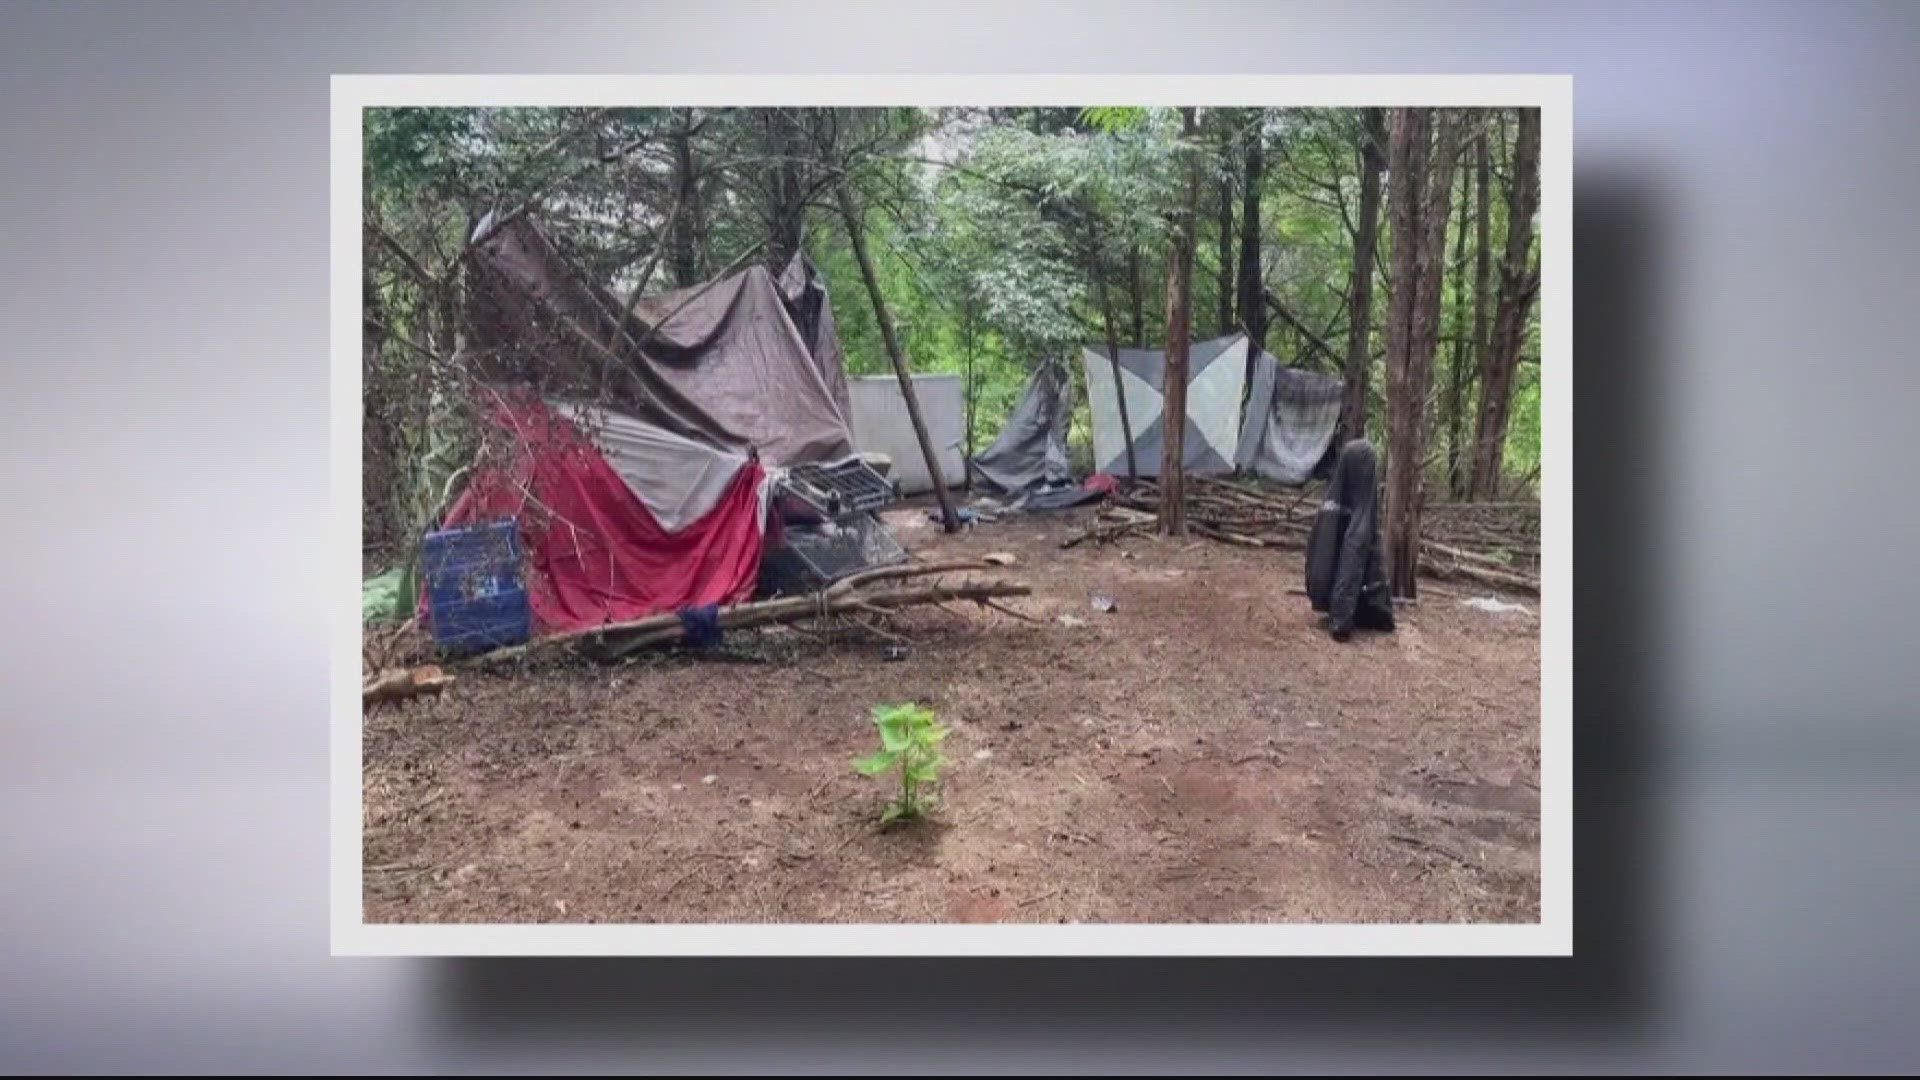 Neighbors say they found their stolen belongings and drug paraphernalia in the woods where the encampment was set up.